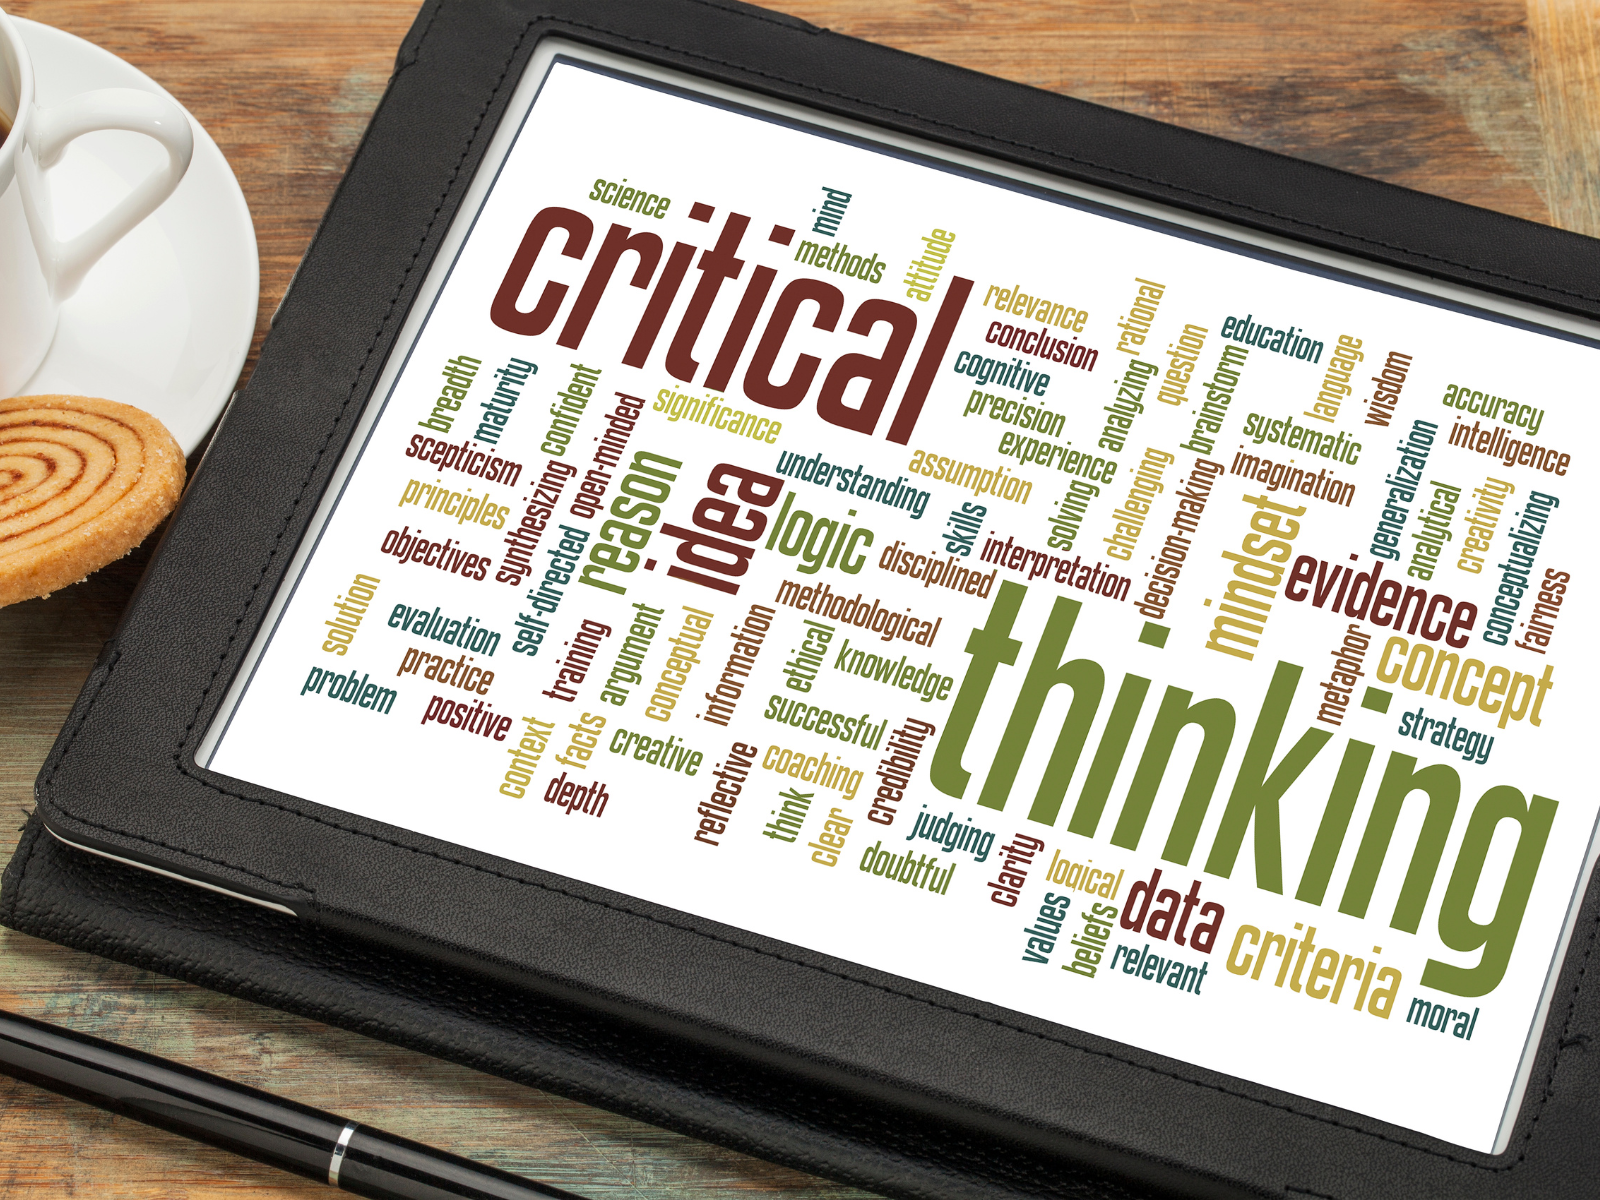 critical thinking and creativity complement one another